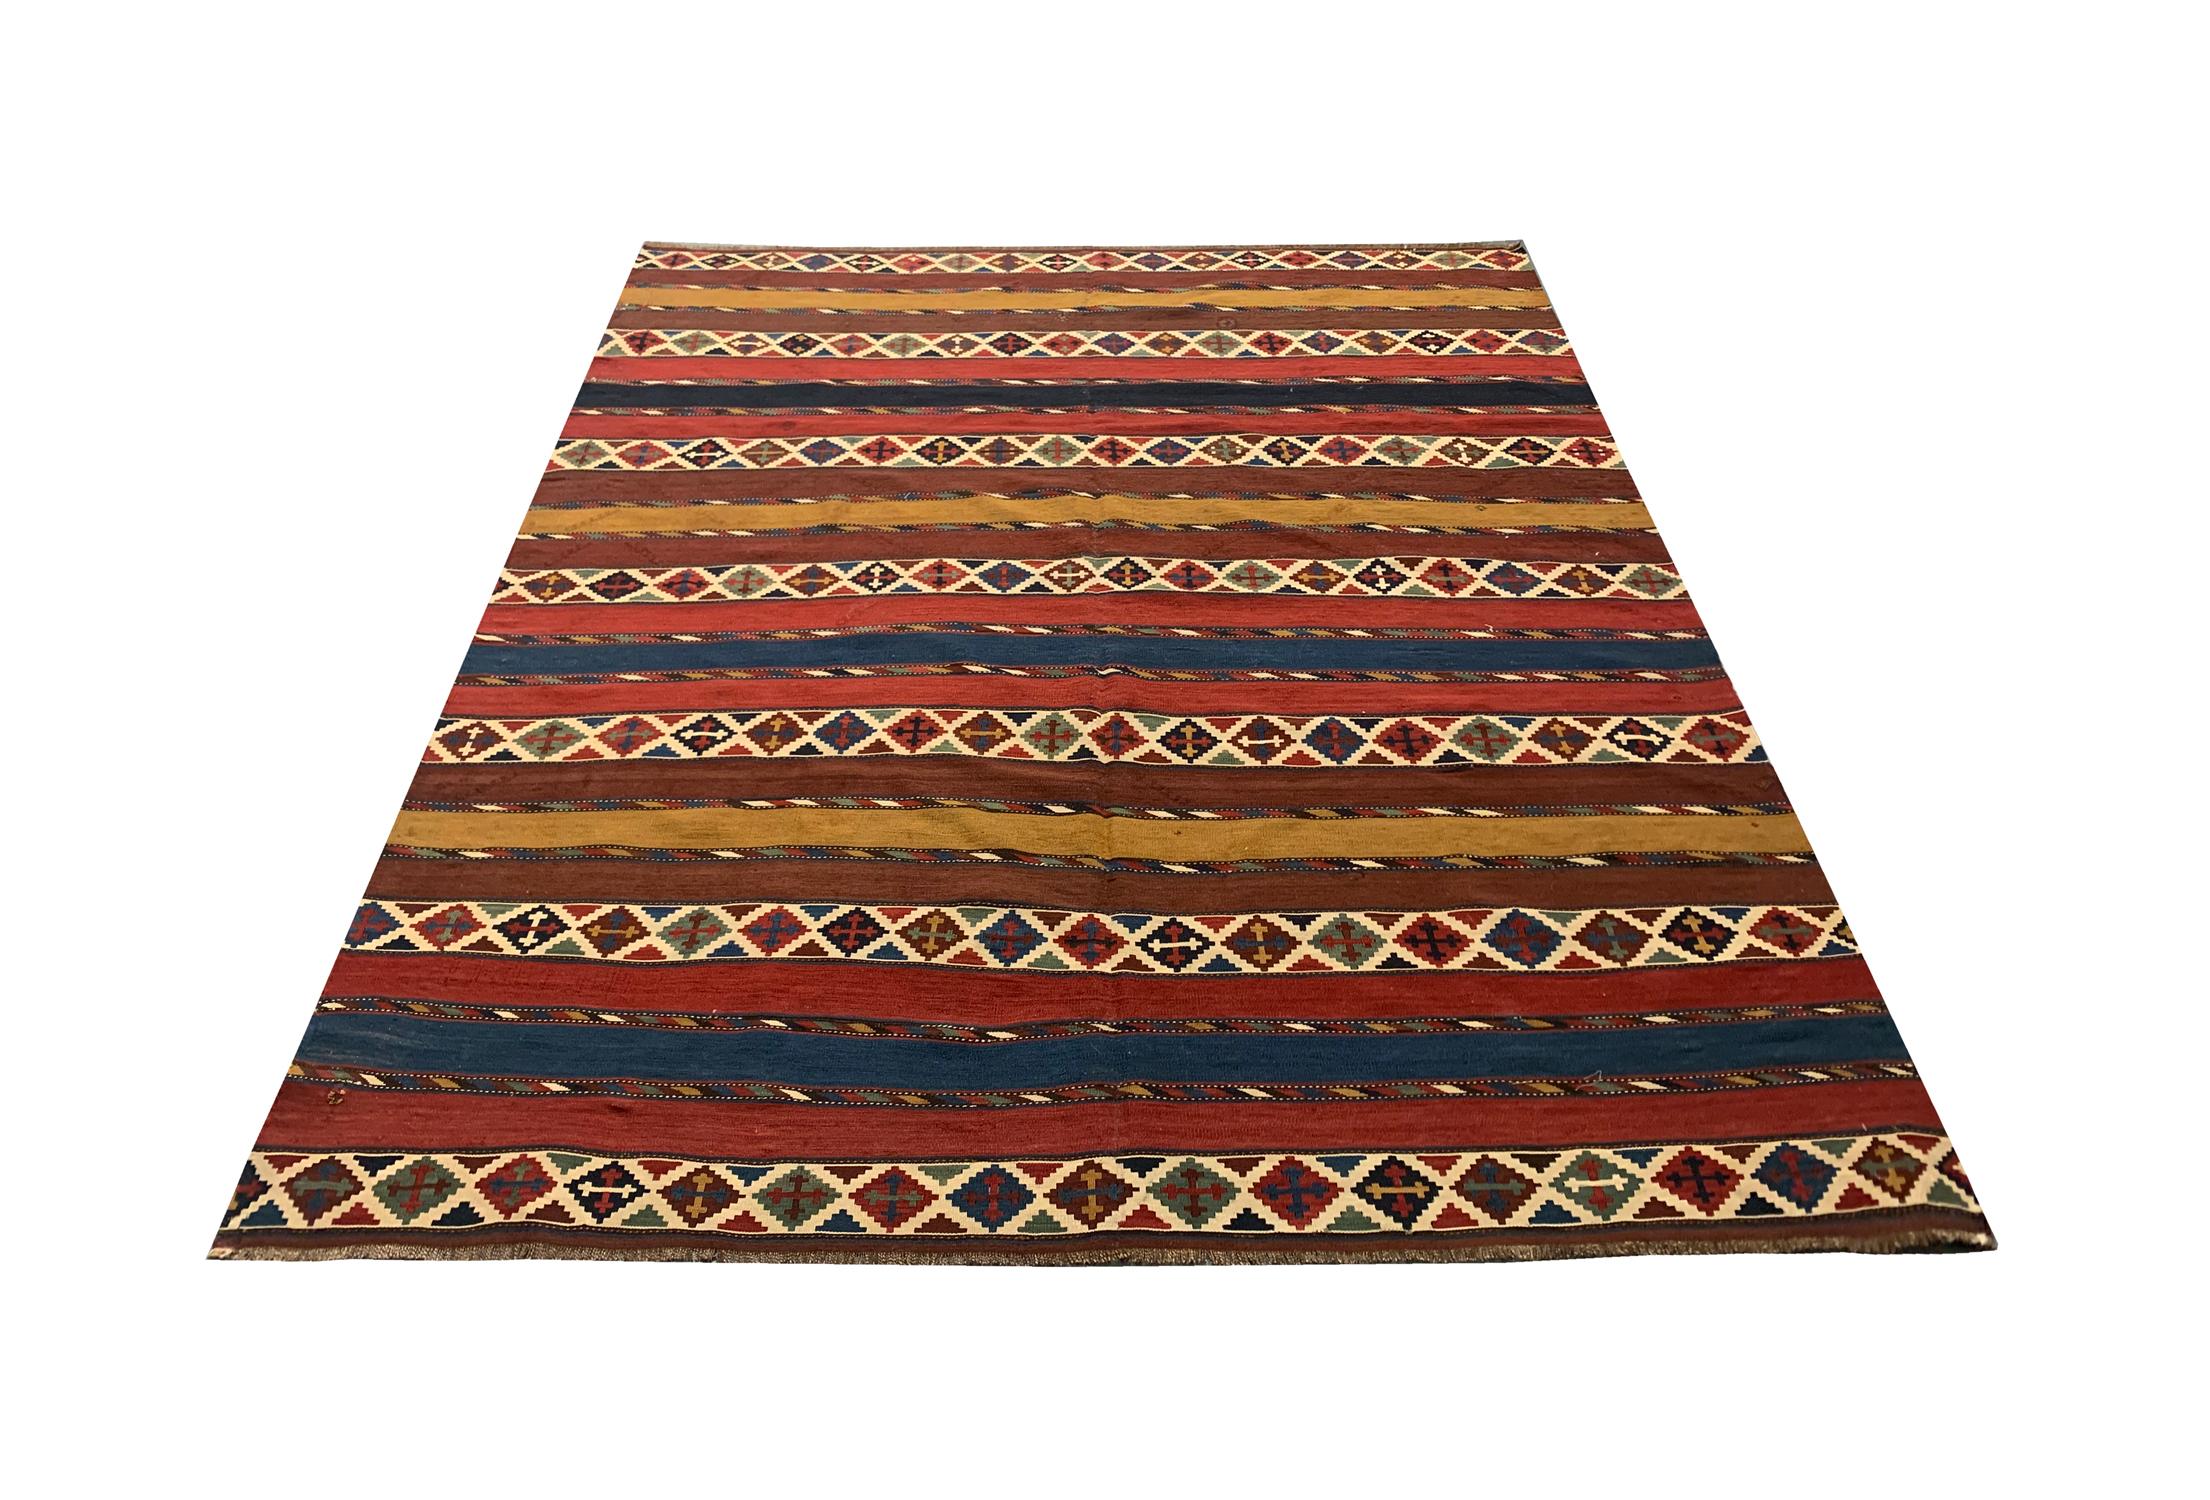 This beautiful striped Caucasian Kilim rug is an antique piece woven in the 1920s with fine, hand-spun wool. The colours in the wool come from natural dyeing techniques which have been used for generations. The design reveals a simple stripe